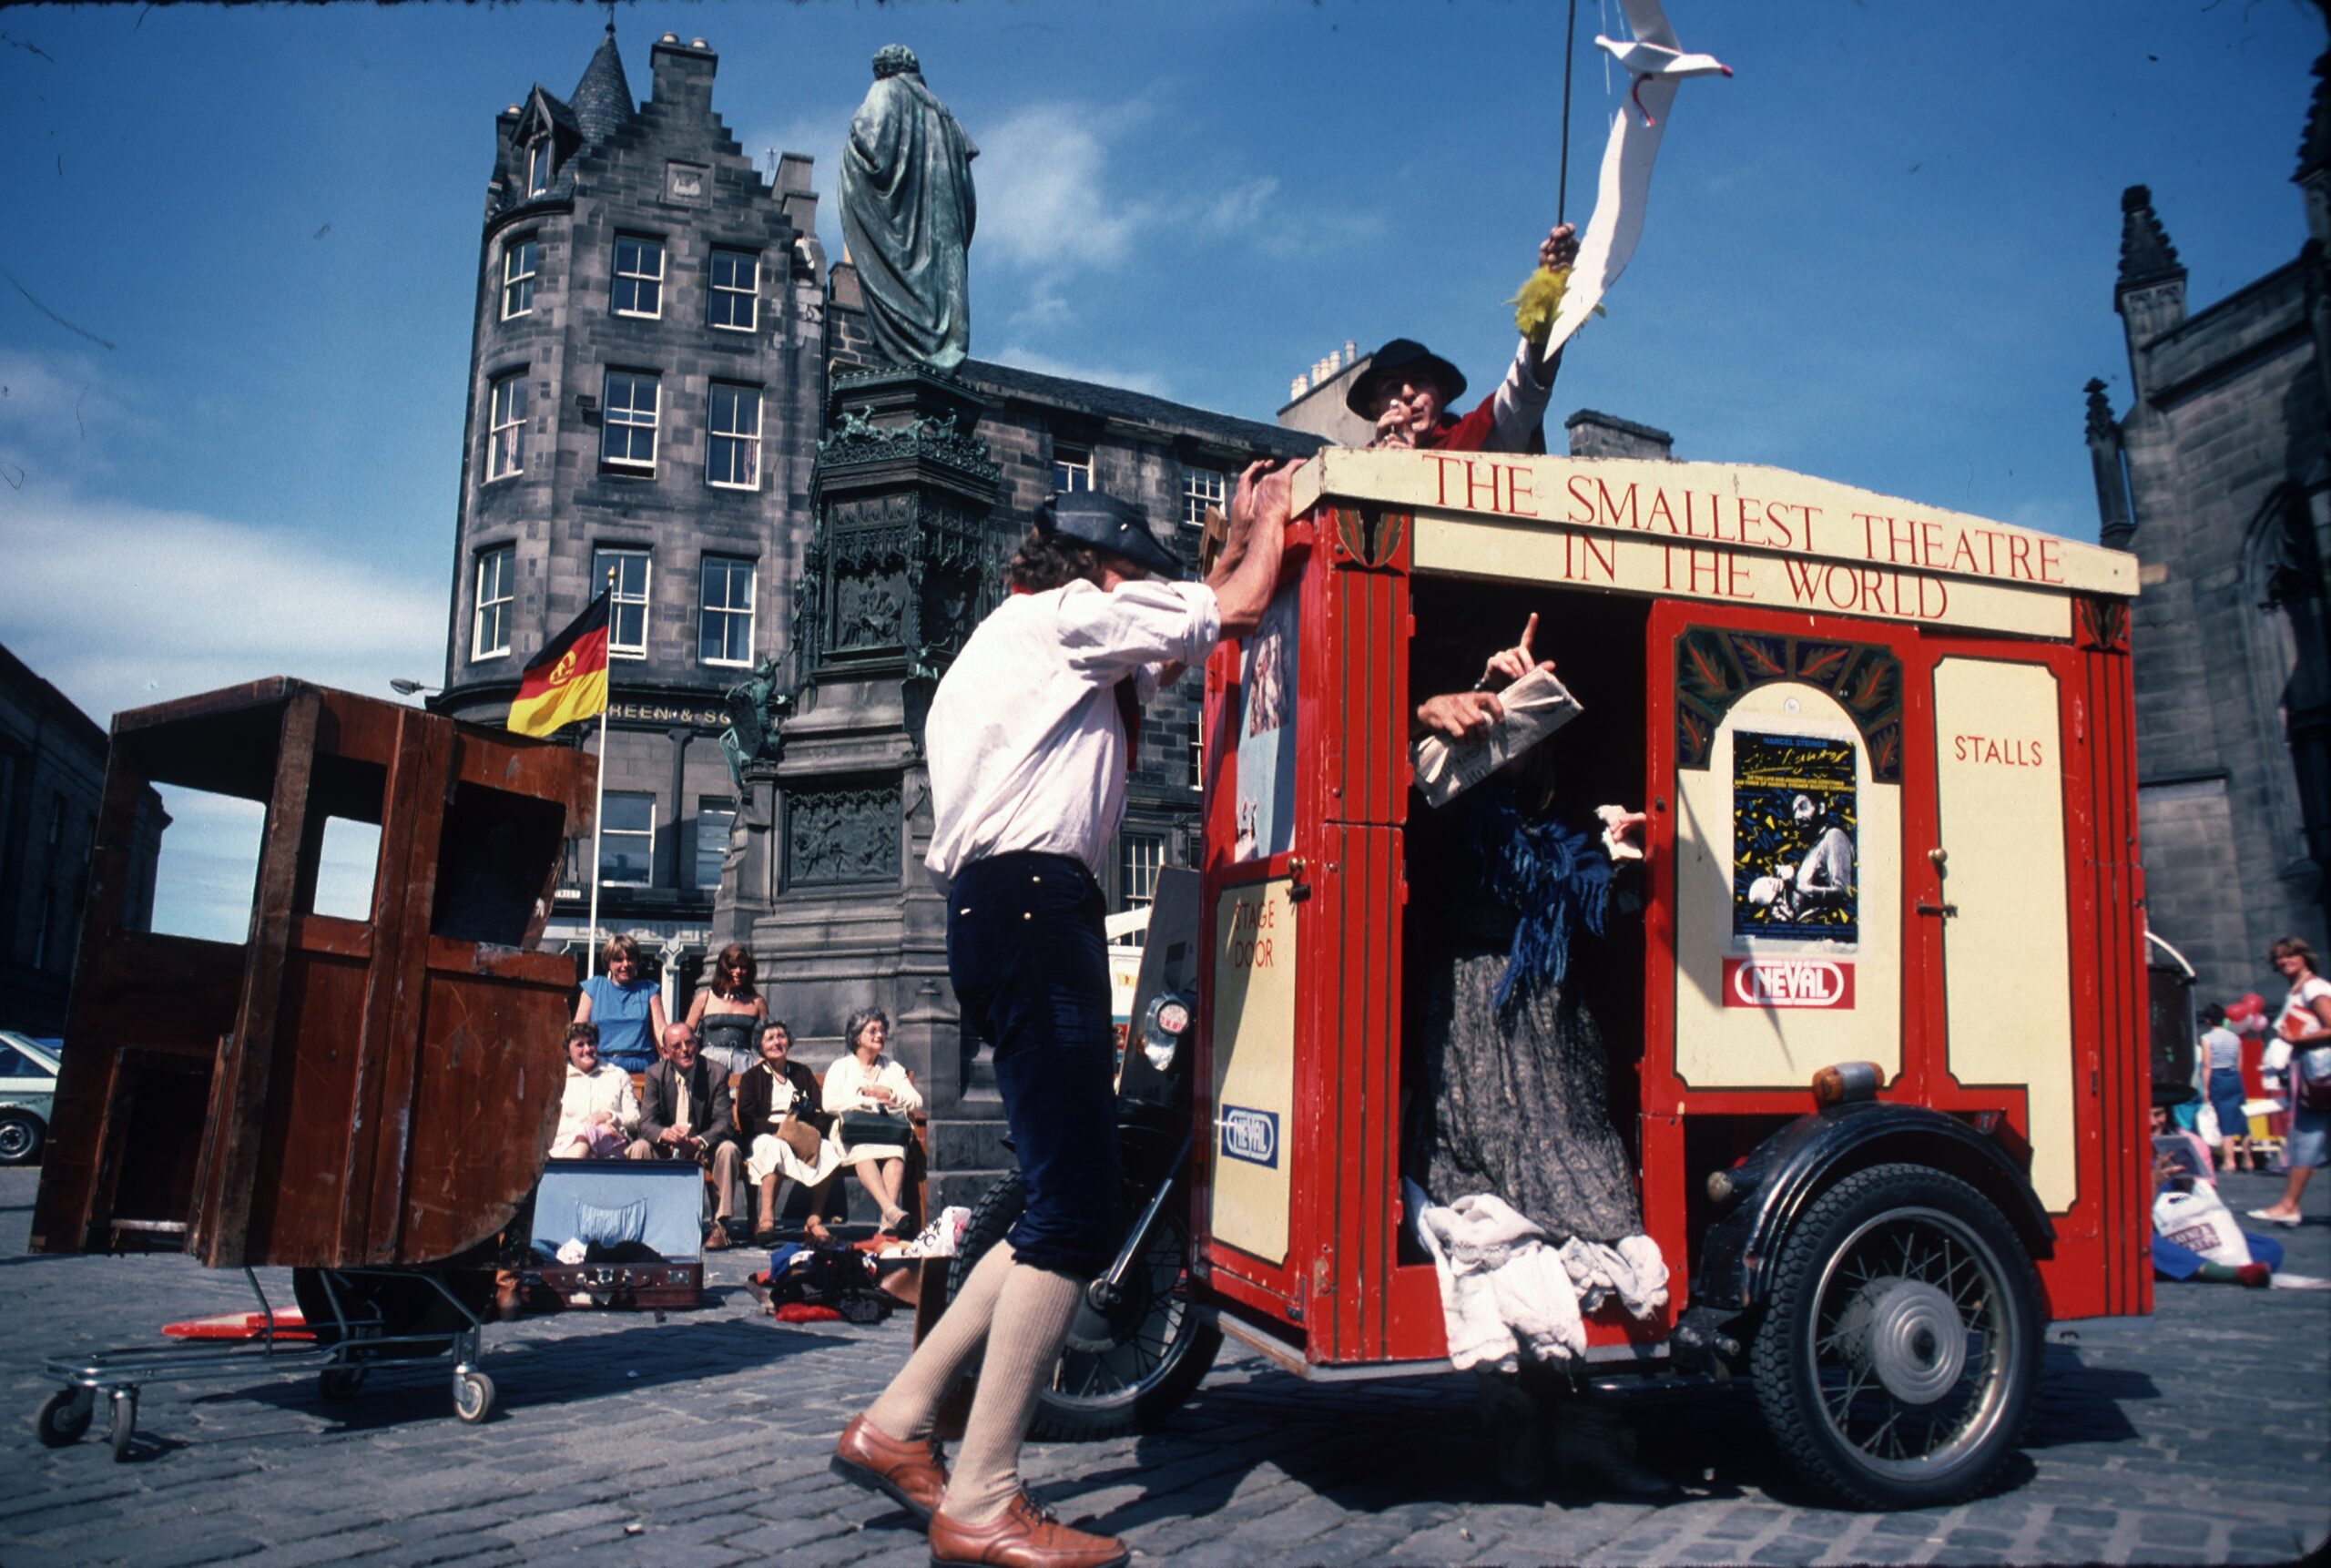 A colour archive photo of the bike with the smallest theatre in the world on a street in Edinburgh. There is a man standing behind the theatre looking over it. Another man is standing next to it. 